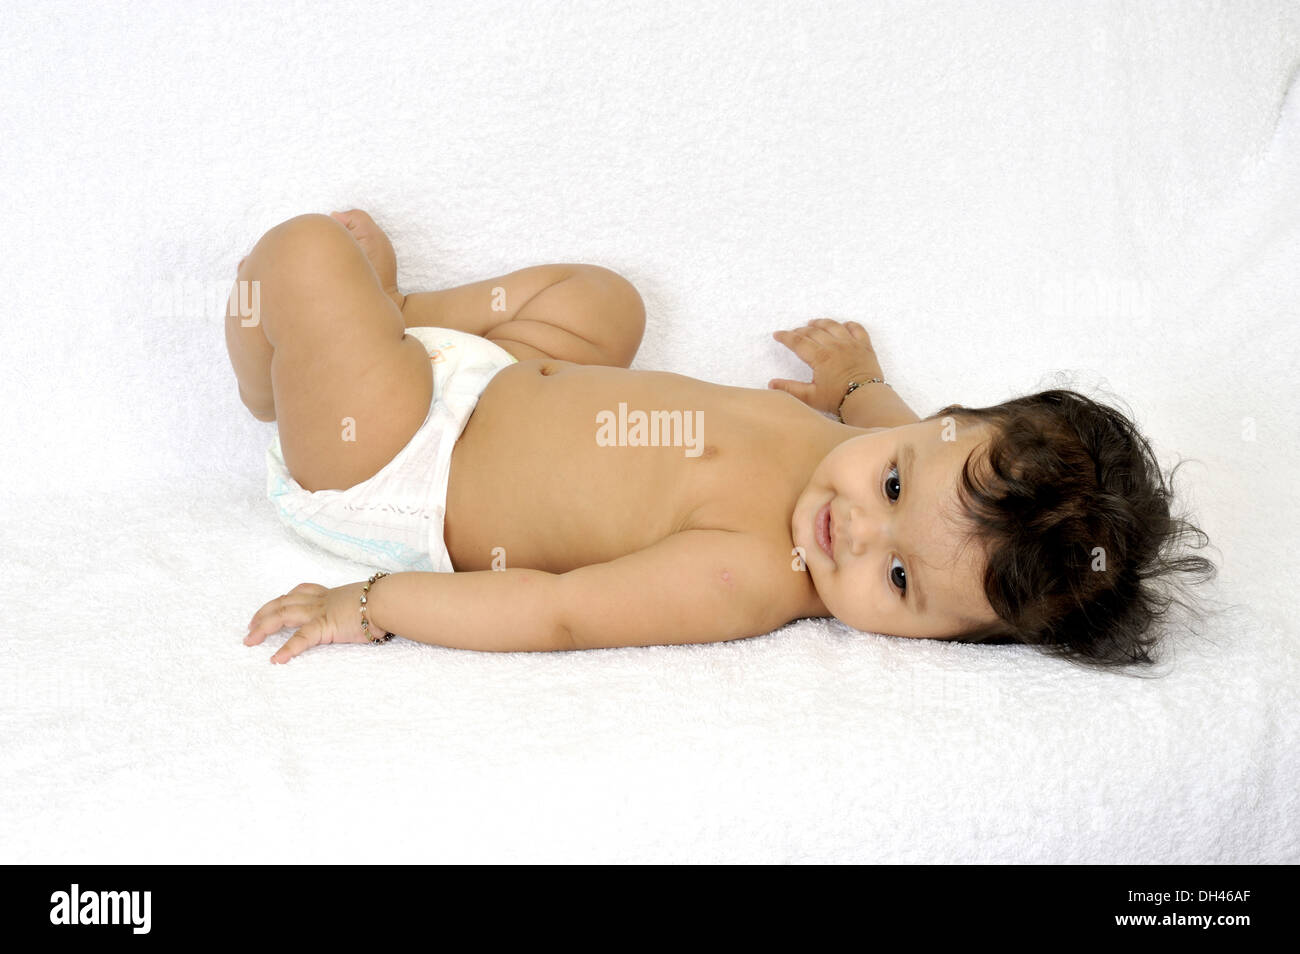 Baby in diaper lying on his back on white background   MR#736PA Stock Photo